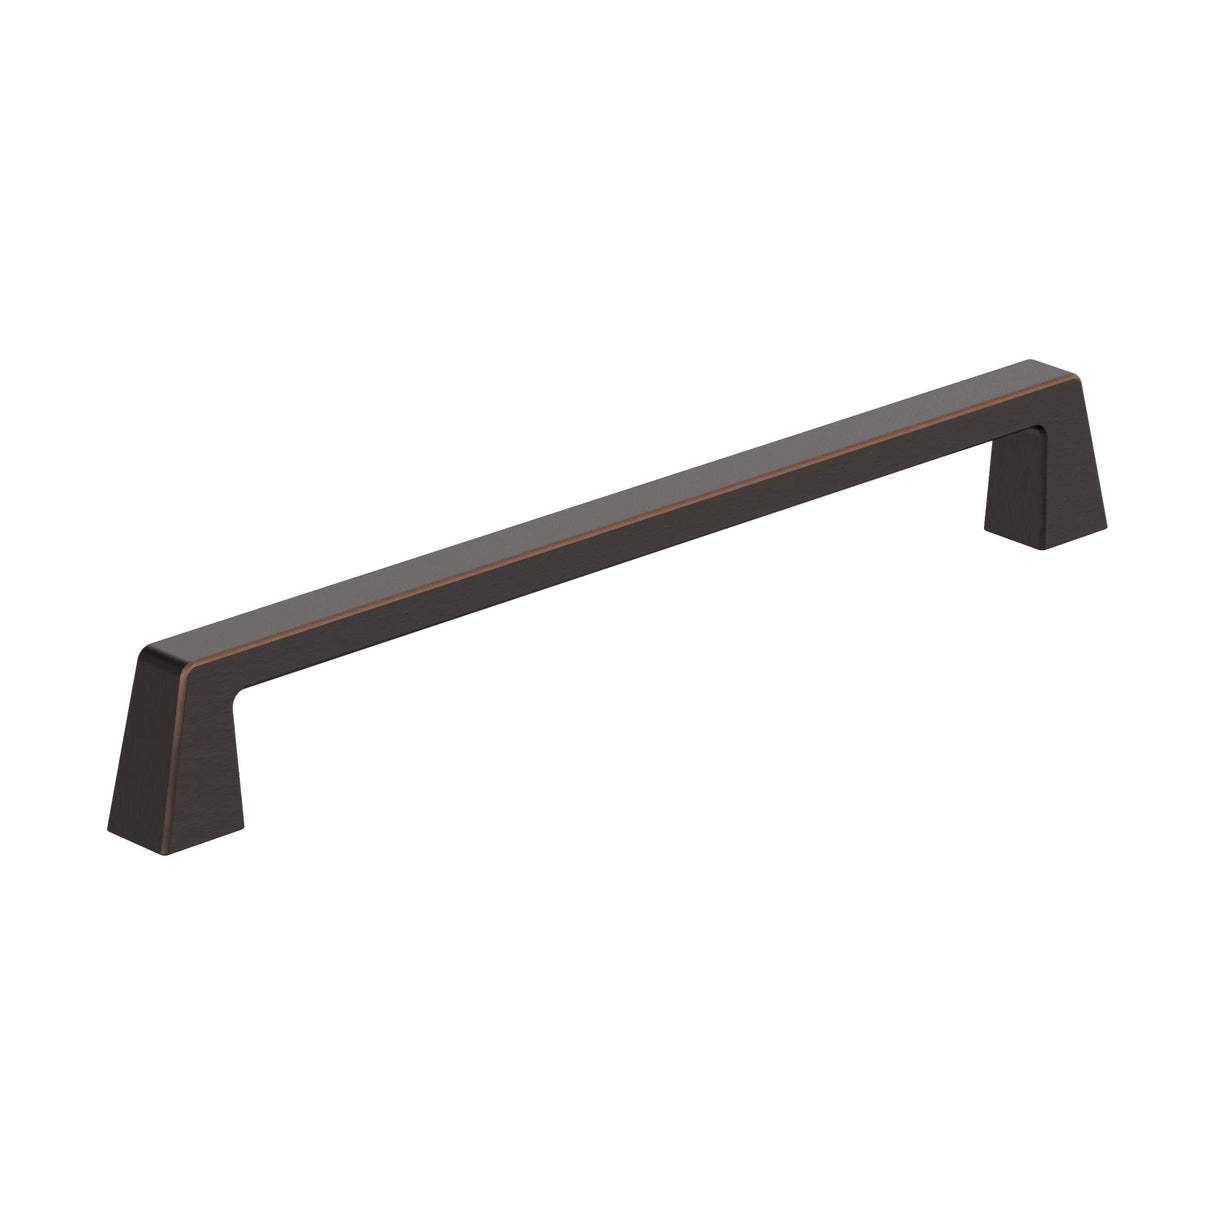 Amerock BP55282ORB Oil Rubbed Bronze Cabinet Pull 8 in (203 mm) Center-to-Center Cabinet Handle Blackrock Drawer Pull Kitchen Cabinet Handle Furniture Hardware